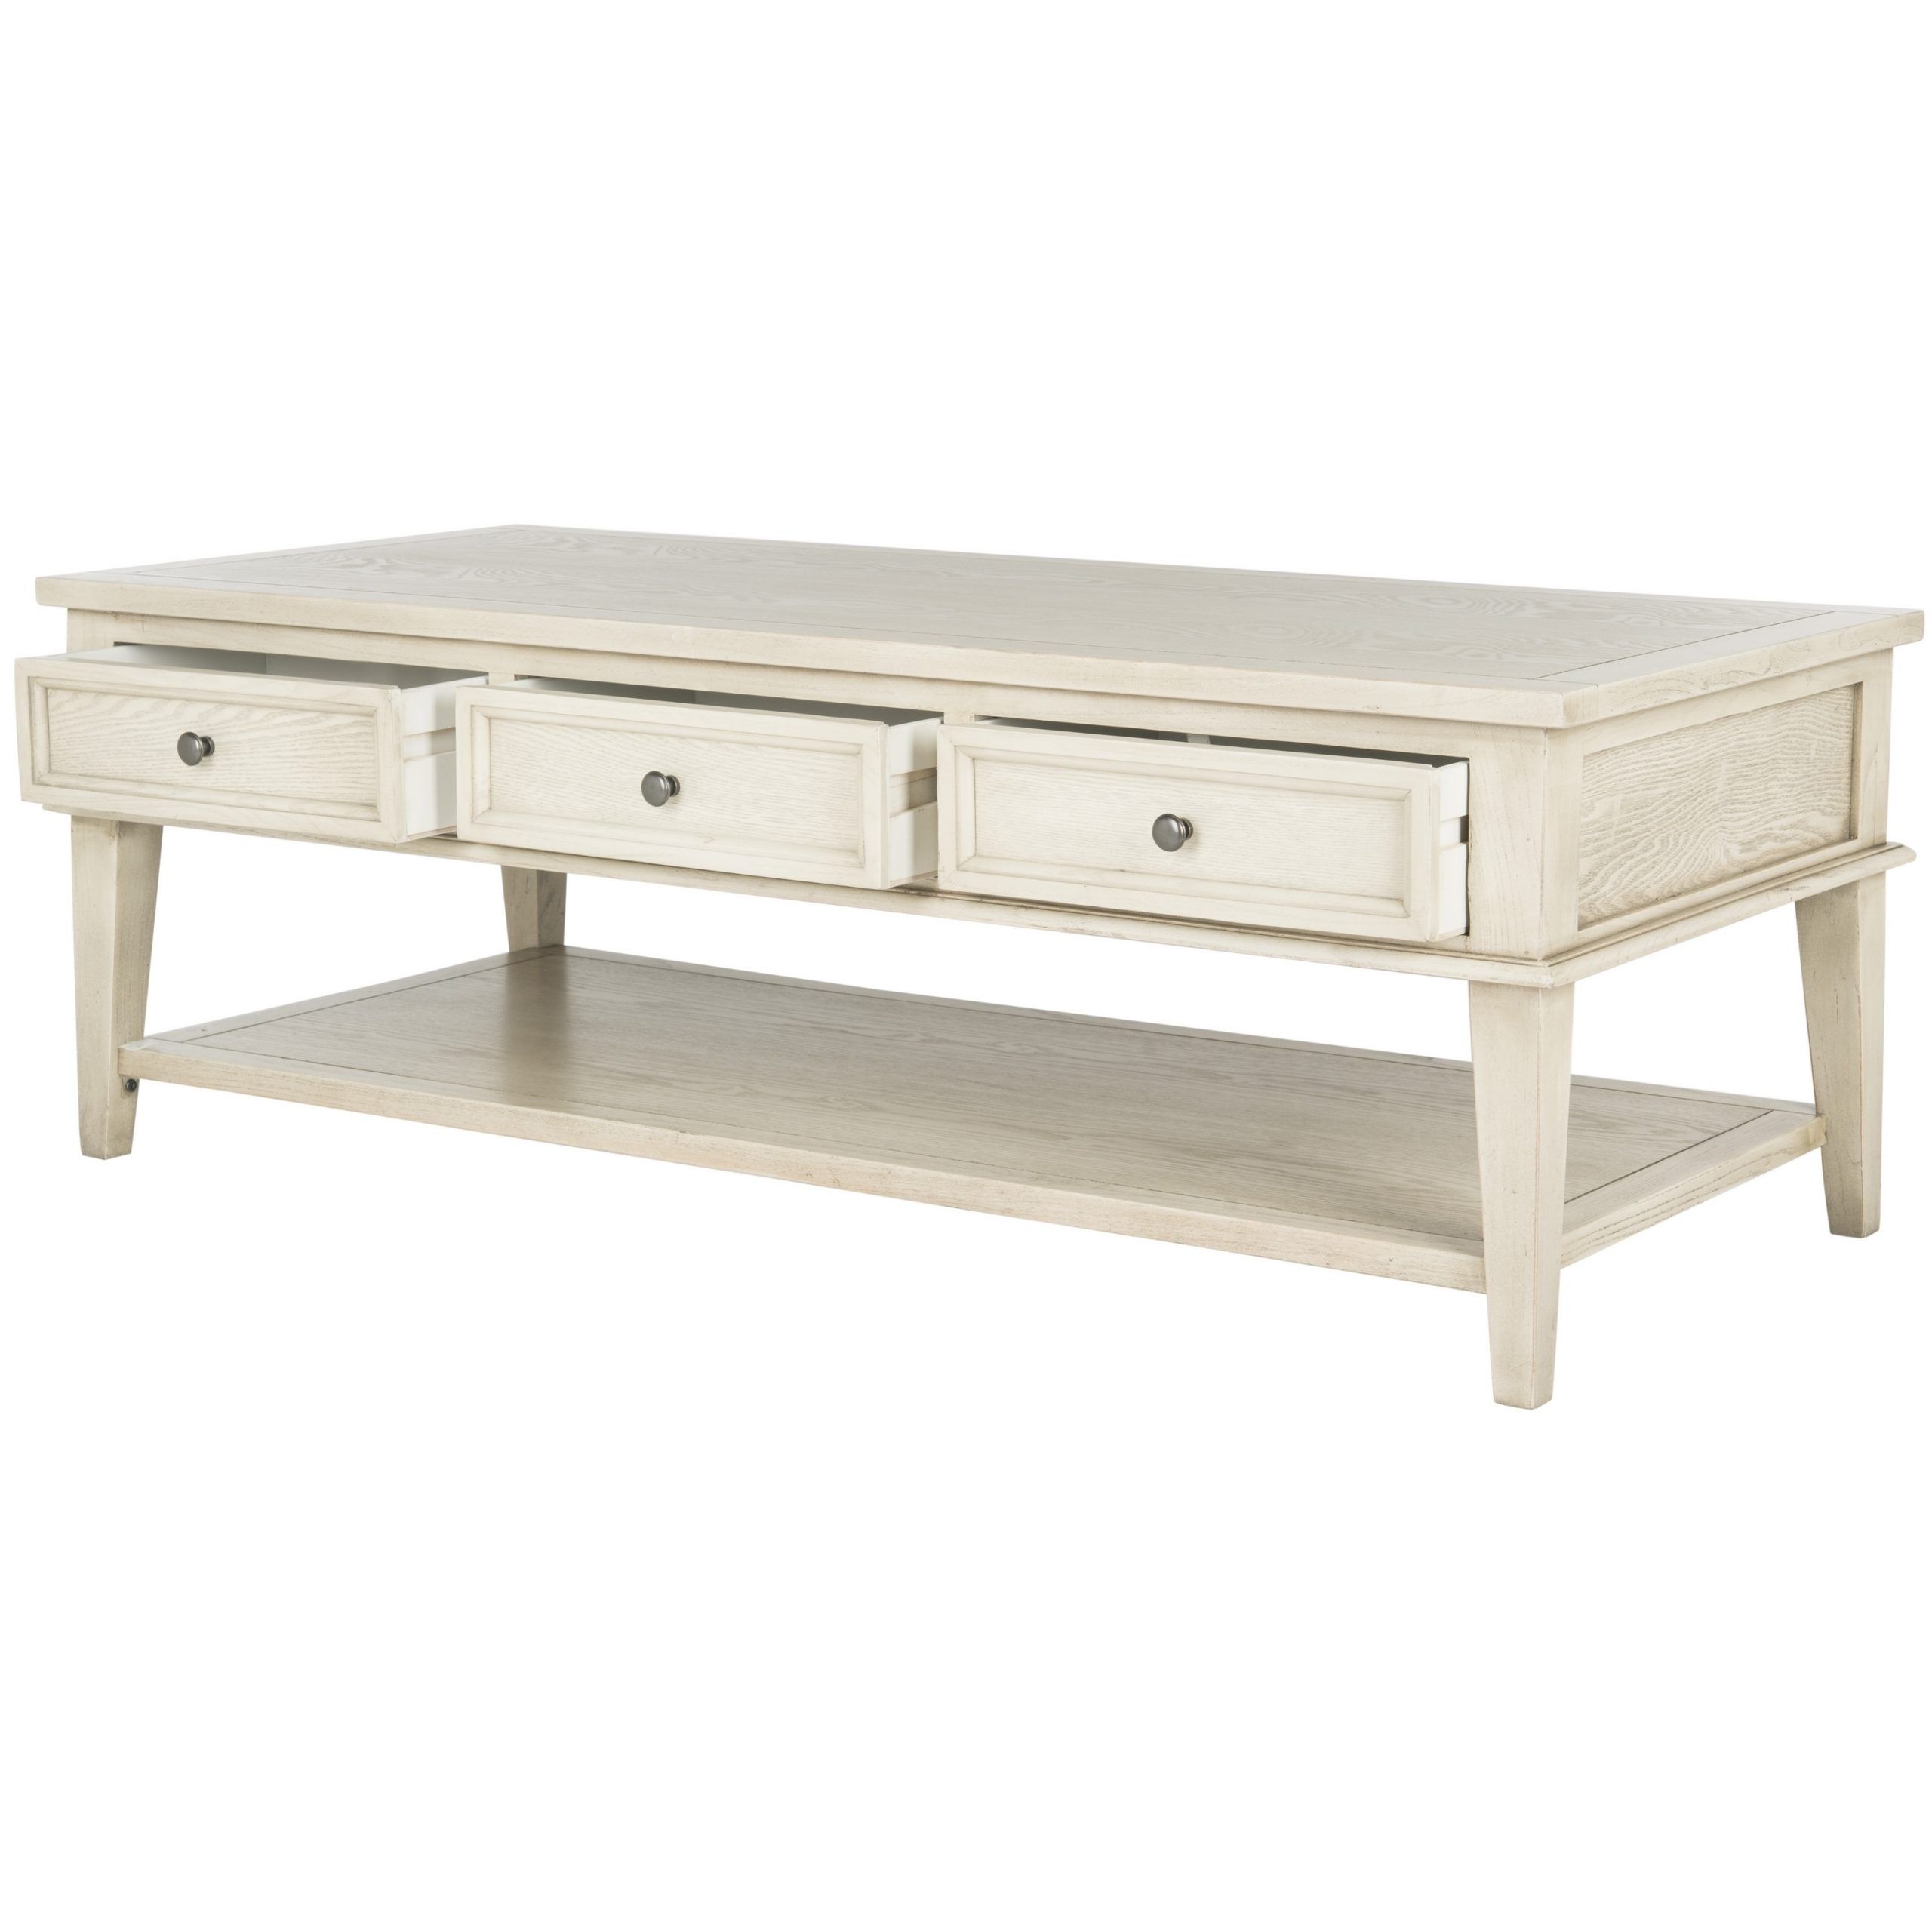 Shop Safavieh Manelin White Washed Coffee Table – Free In Trendy Oceanside White Washed Coffee Tables (View 20 of 20)